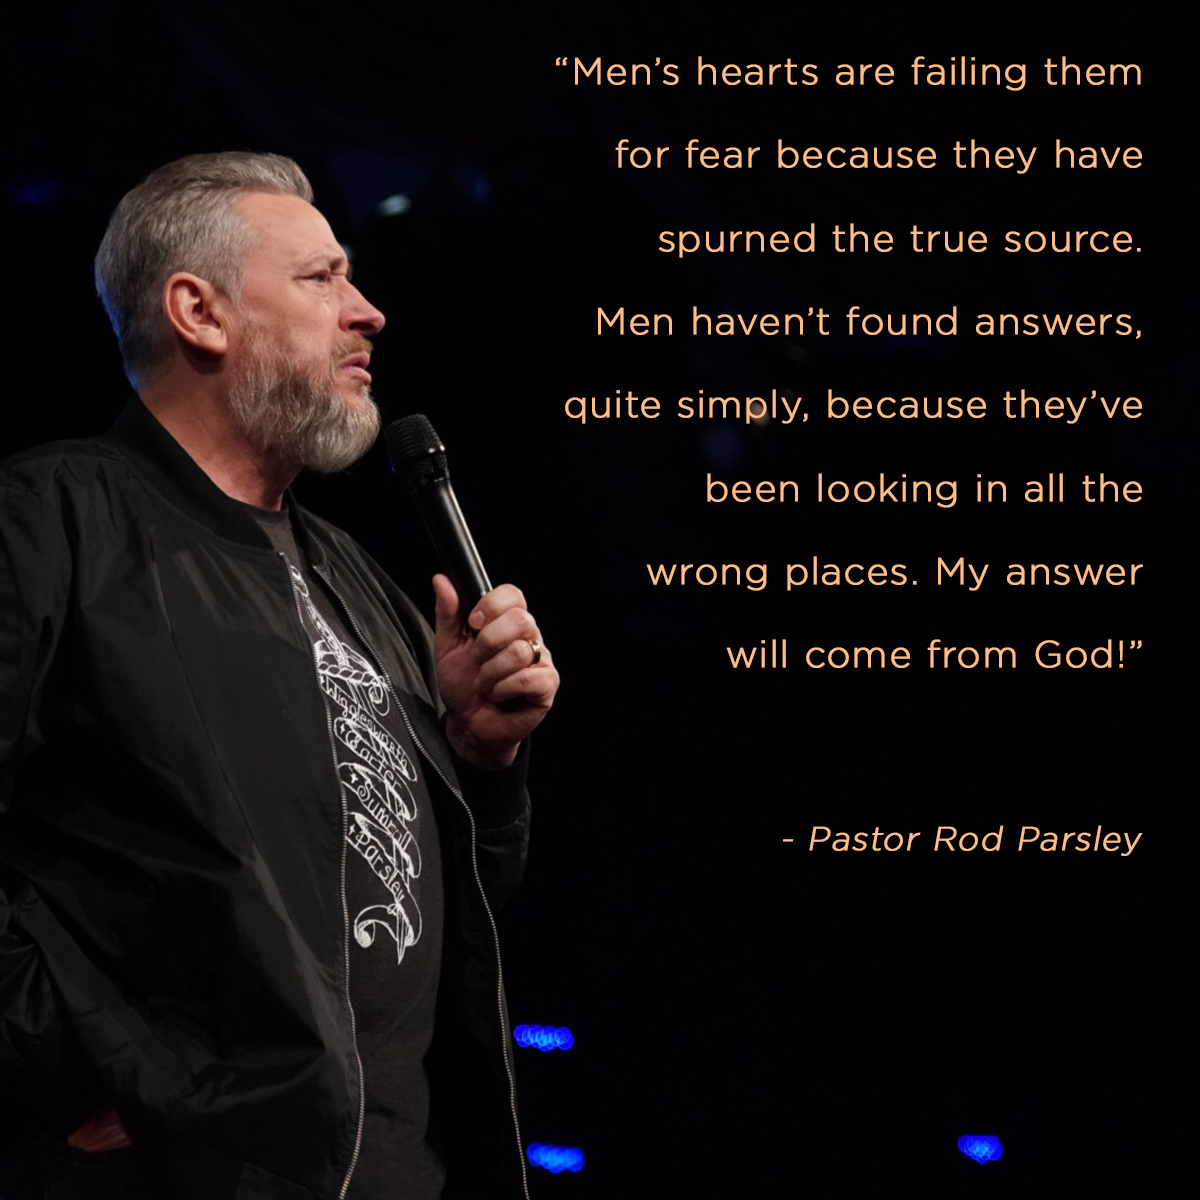 “Mens' hearts are failing them for fear because they have spurned the true source. Men haven’t found answers, quite simply, because they’ve been looking in all the wrong places. My answer will come from God!” – Pastor Rod Parsley